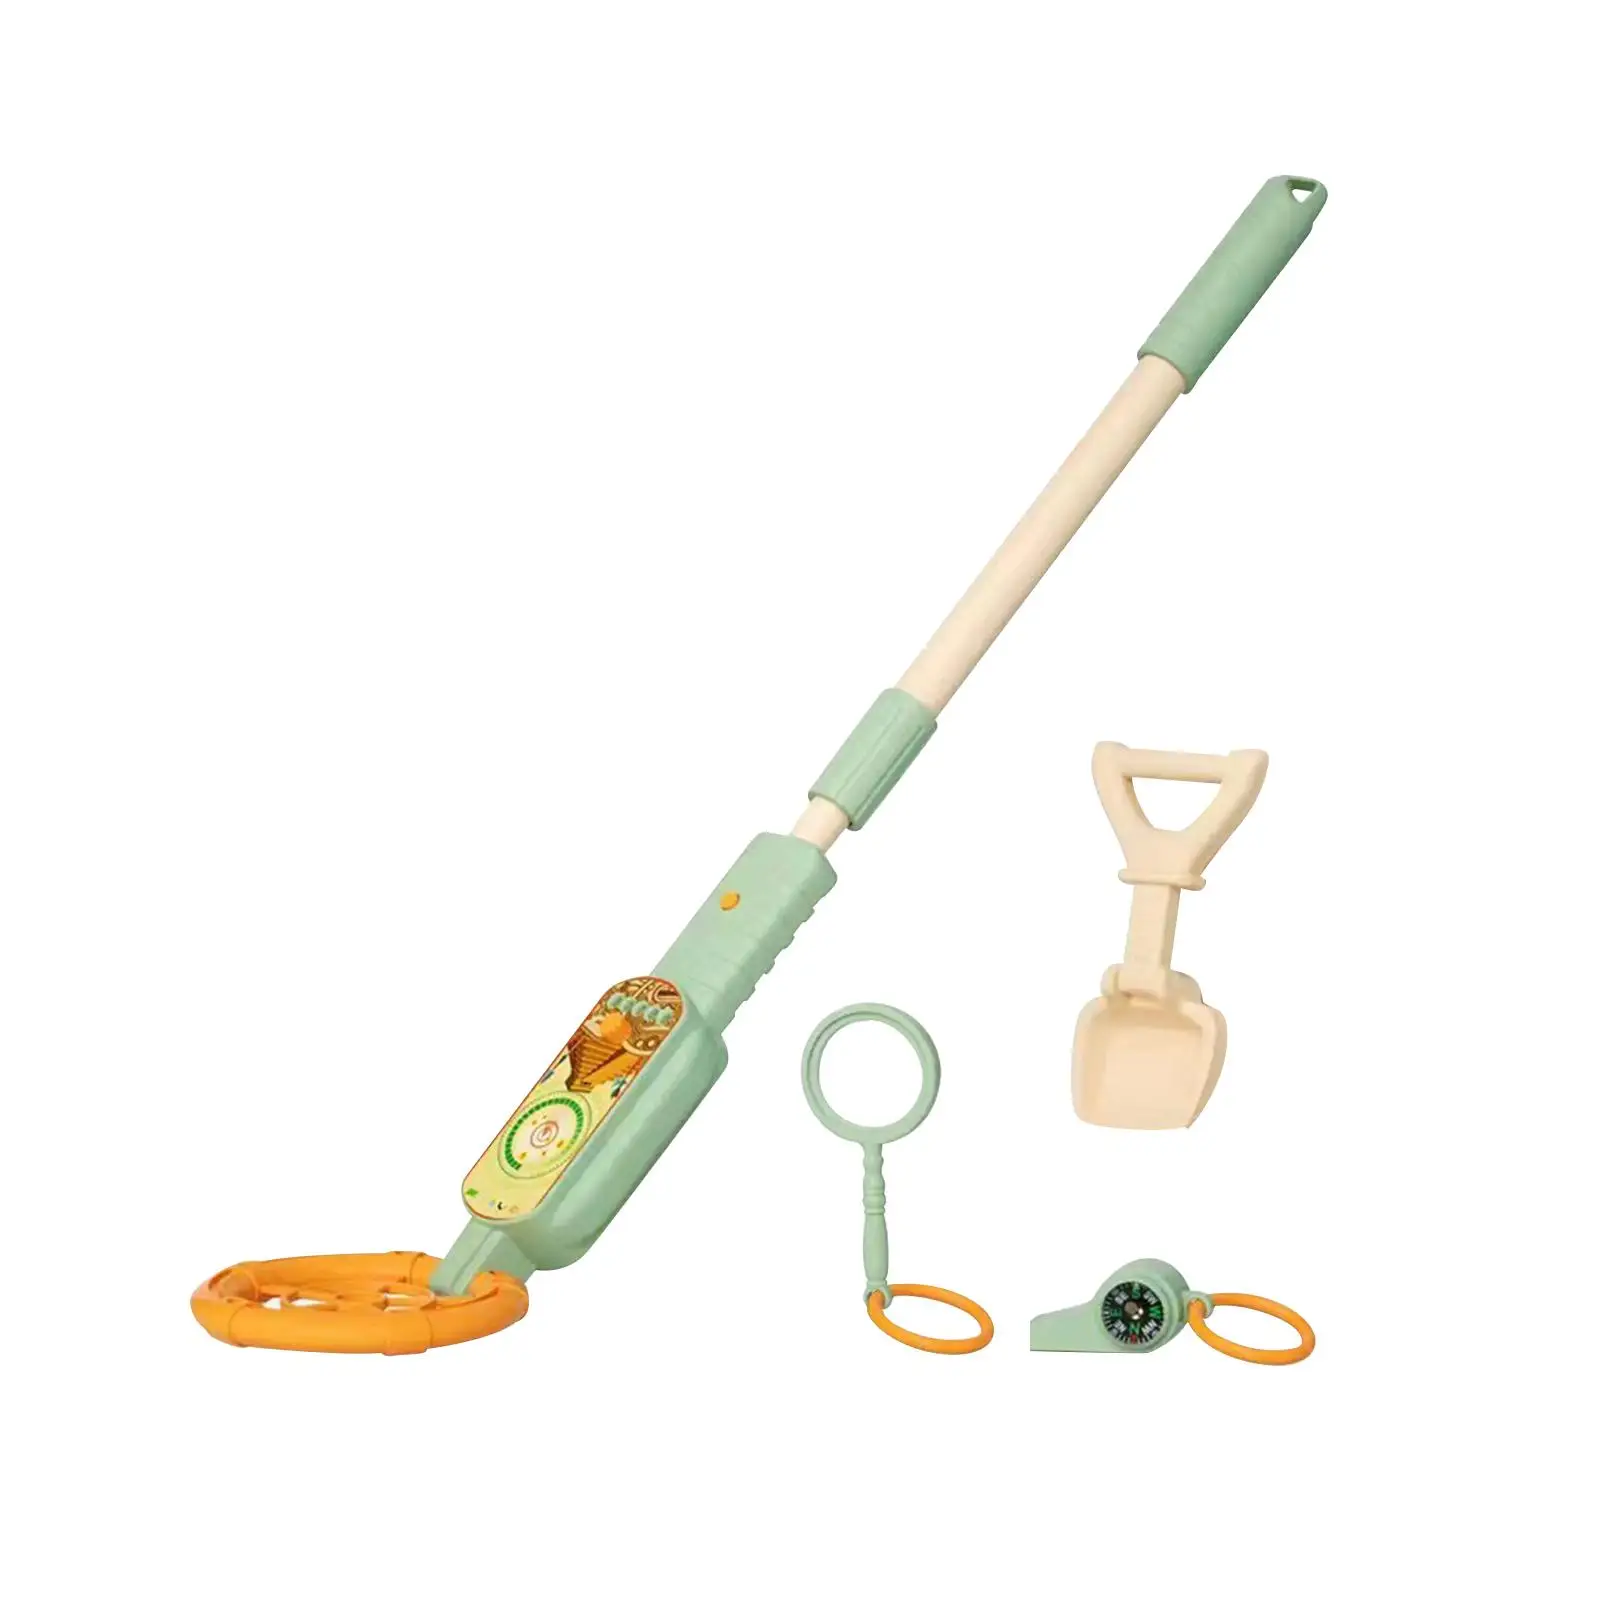 Metal Detecting Toy Outdoor Indoor Nature Exploration Toy Metal Searching Equipment Treasure Seeker Kids Camping for Boy Girl